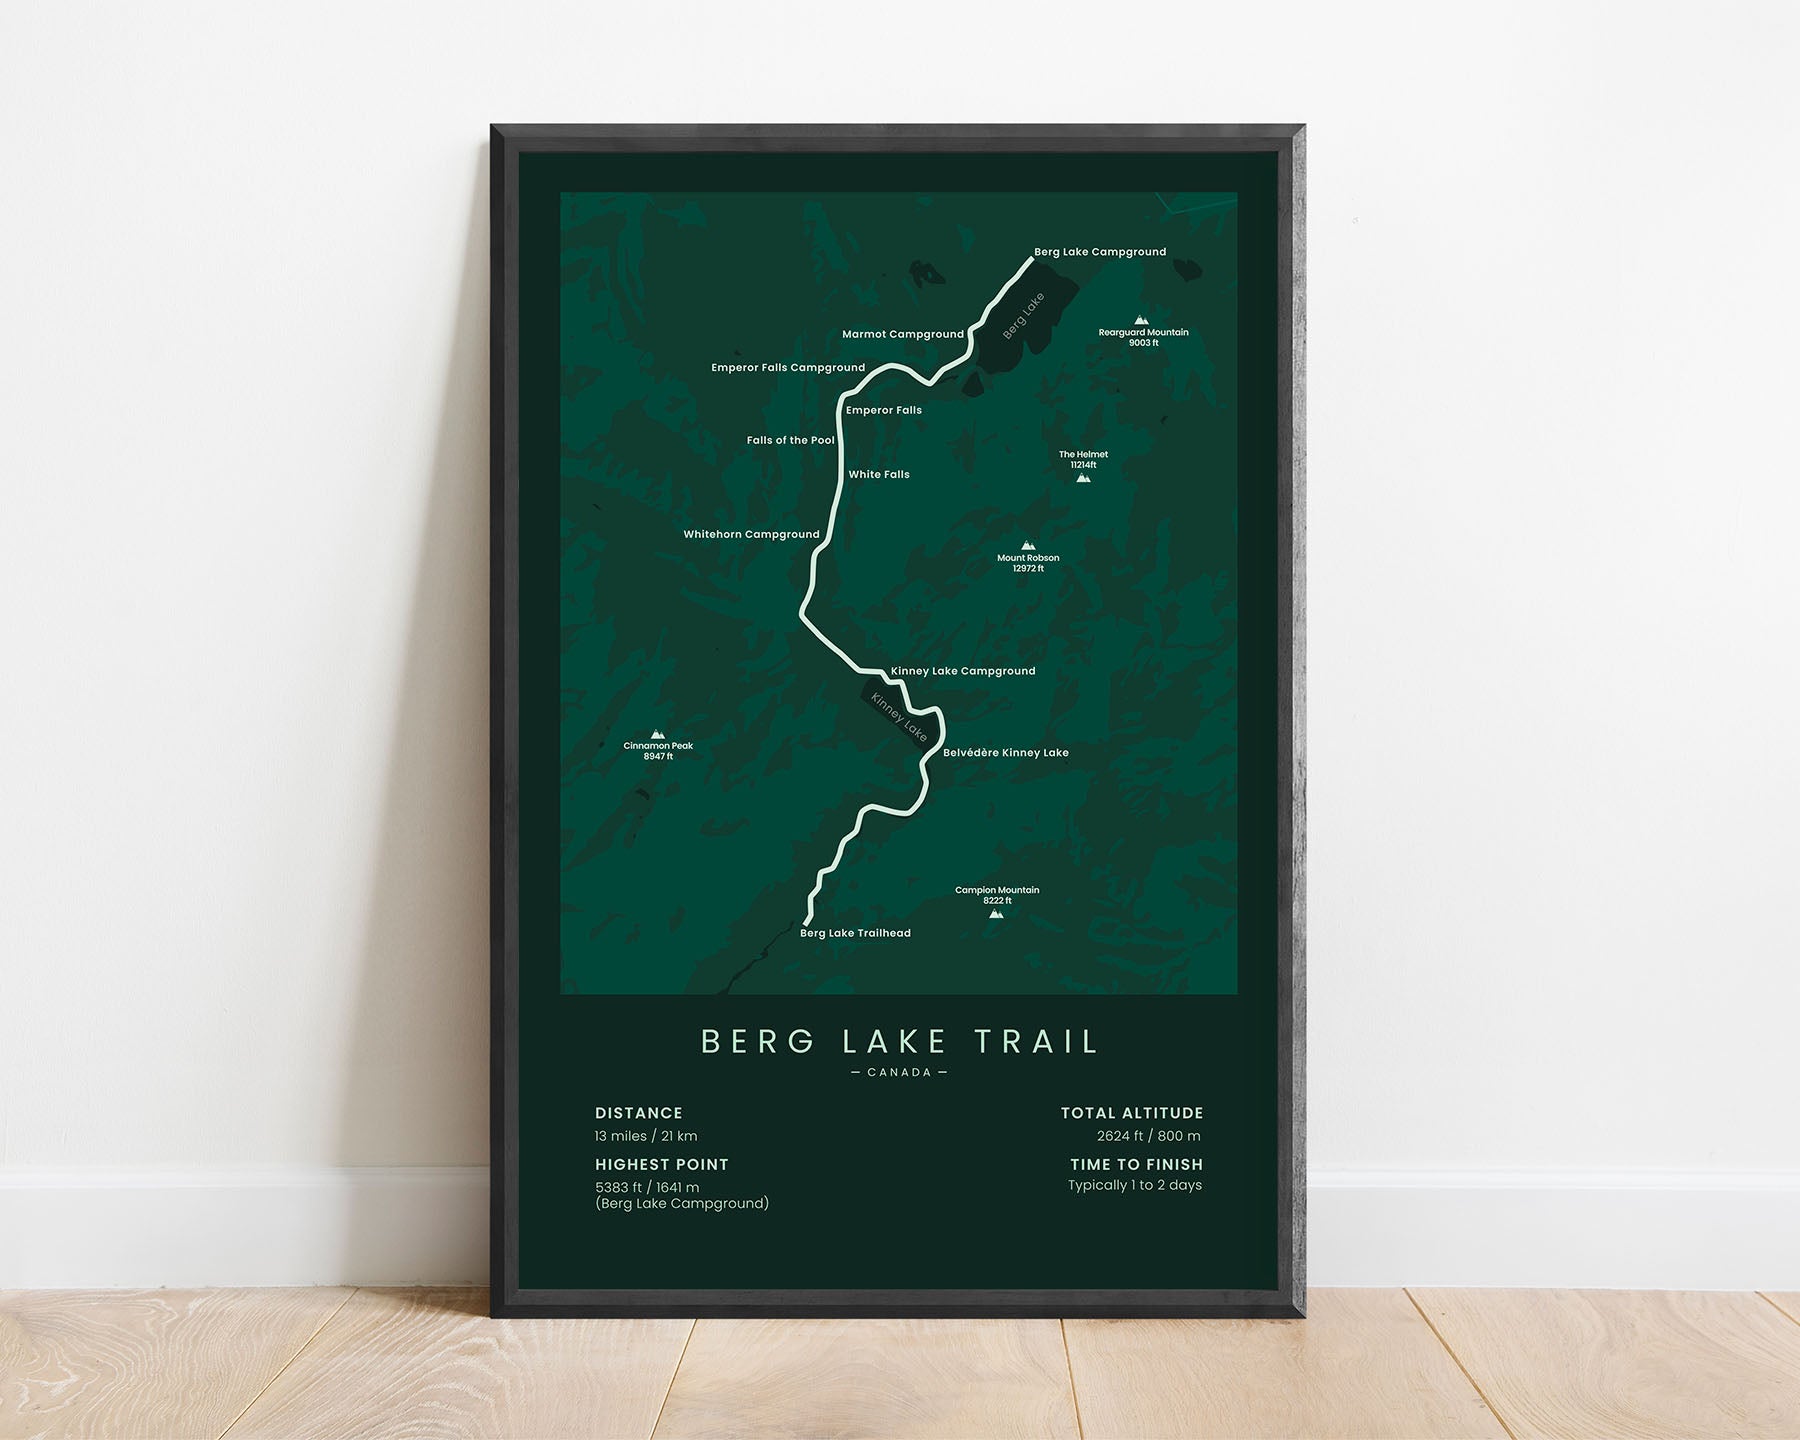 Berg Lake Trail (Canadian Rockies) route poster with green background